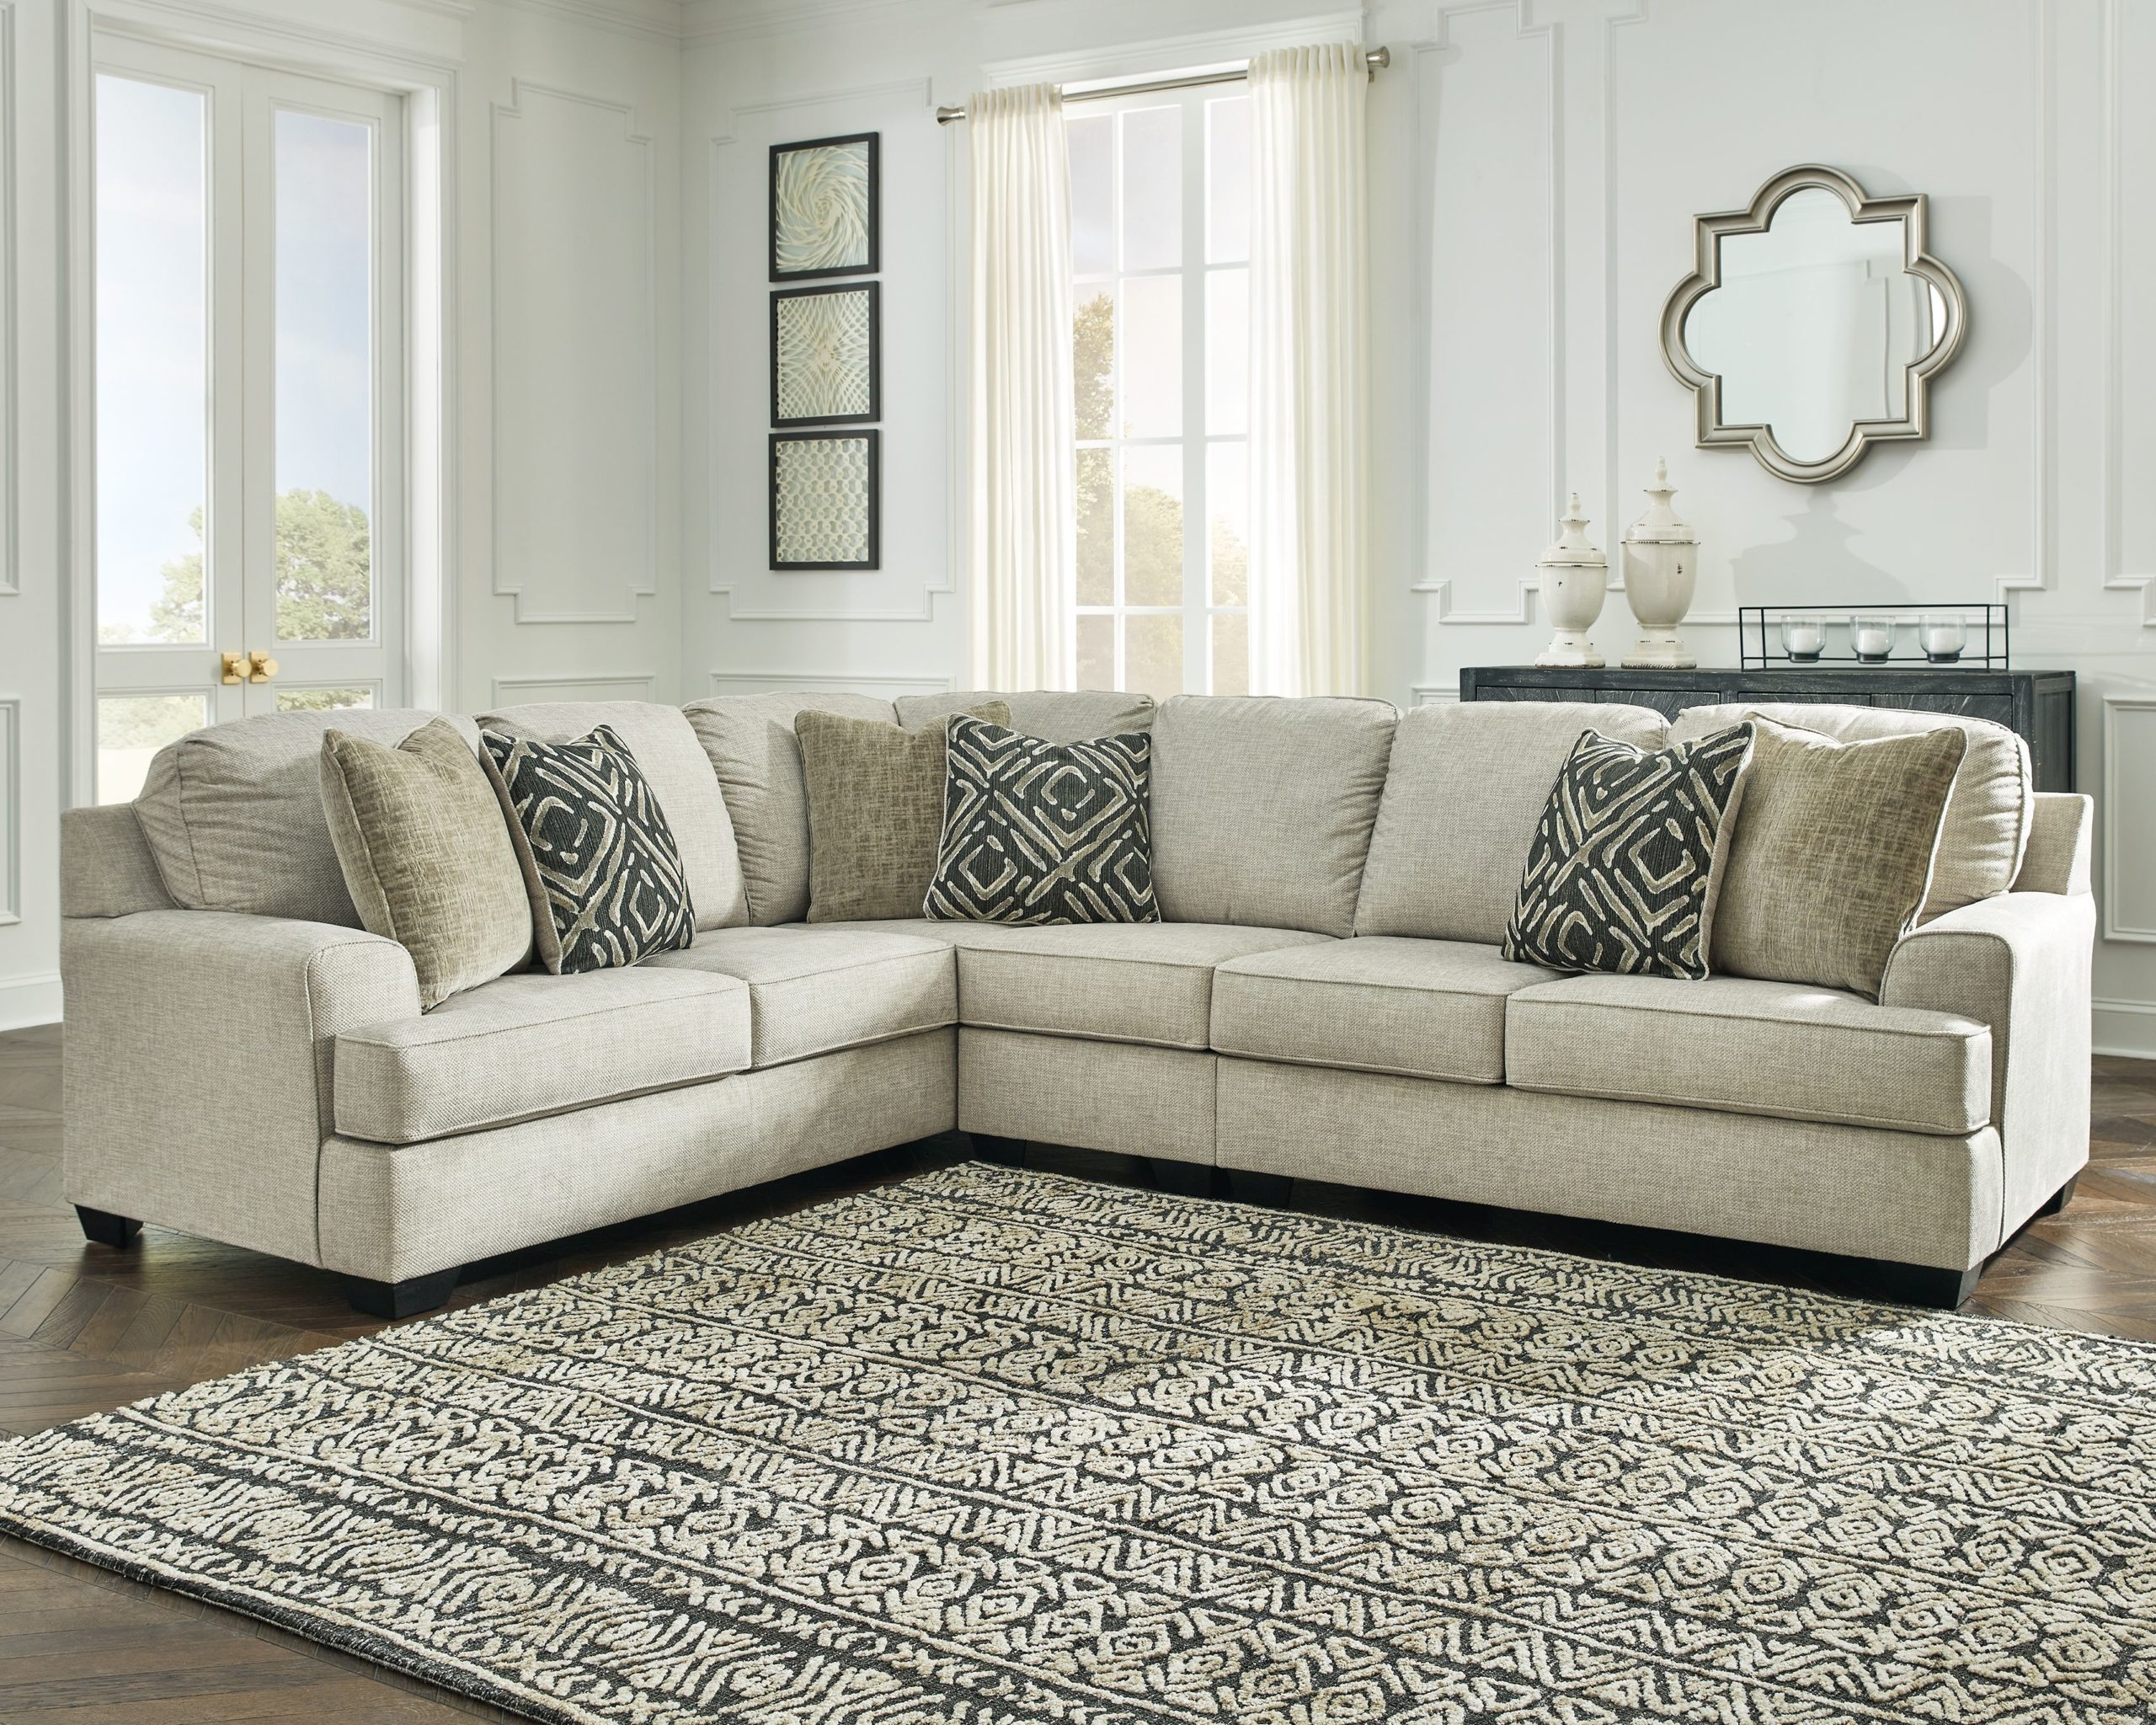 Ashley Furniture Wellhaven Linen Left Arm Facing Sofa With Corner Wedge 3 Pc Sectional Ez S Leasing